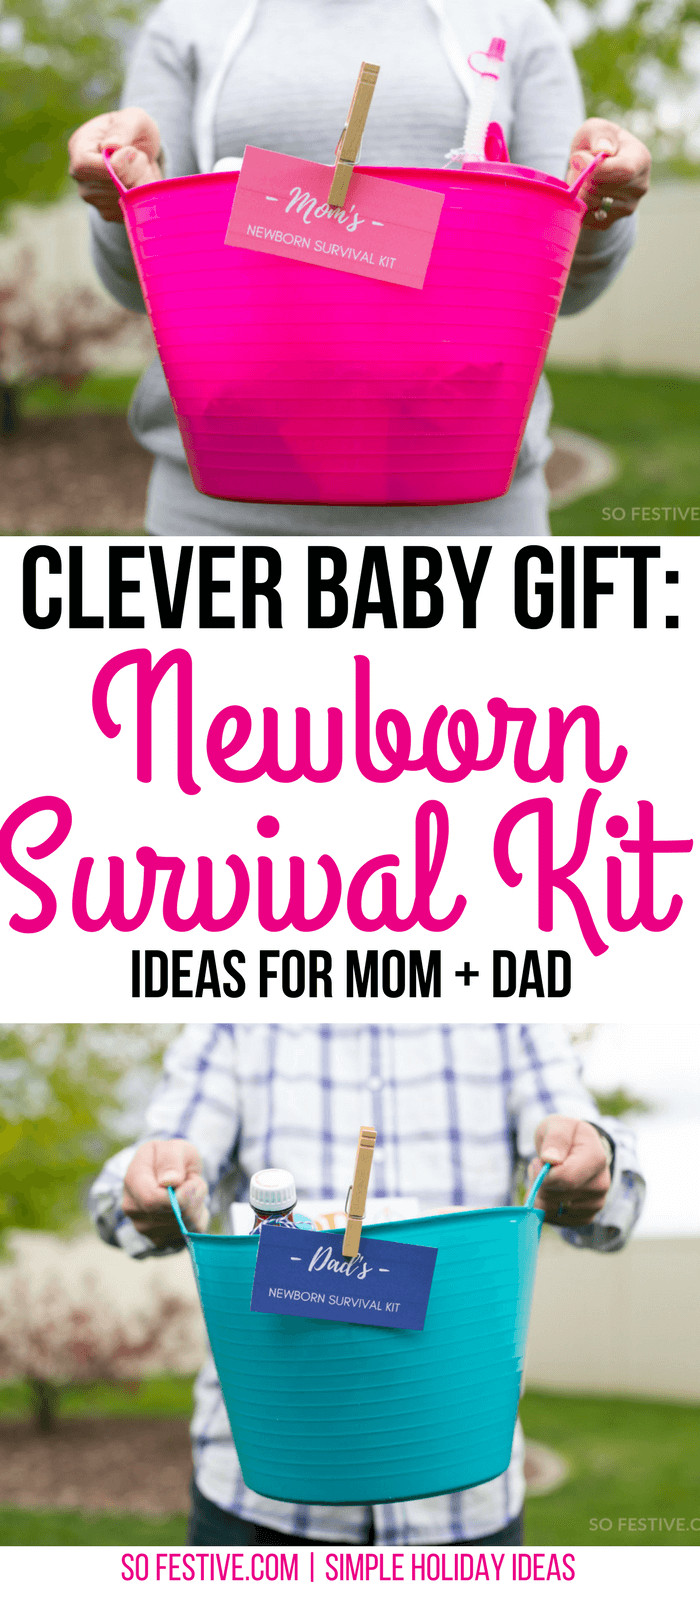 Ideas For New Baby Gift
 Newborn Survival Kit Baby Gift For Parents So Festive